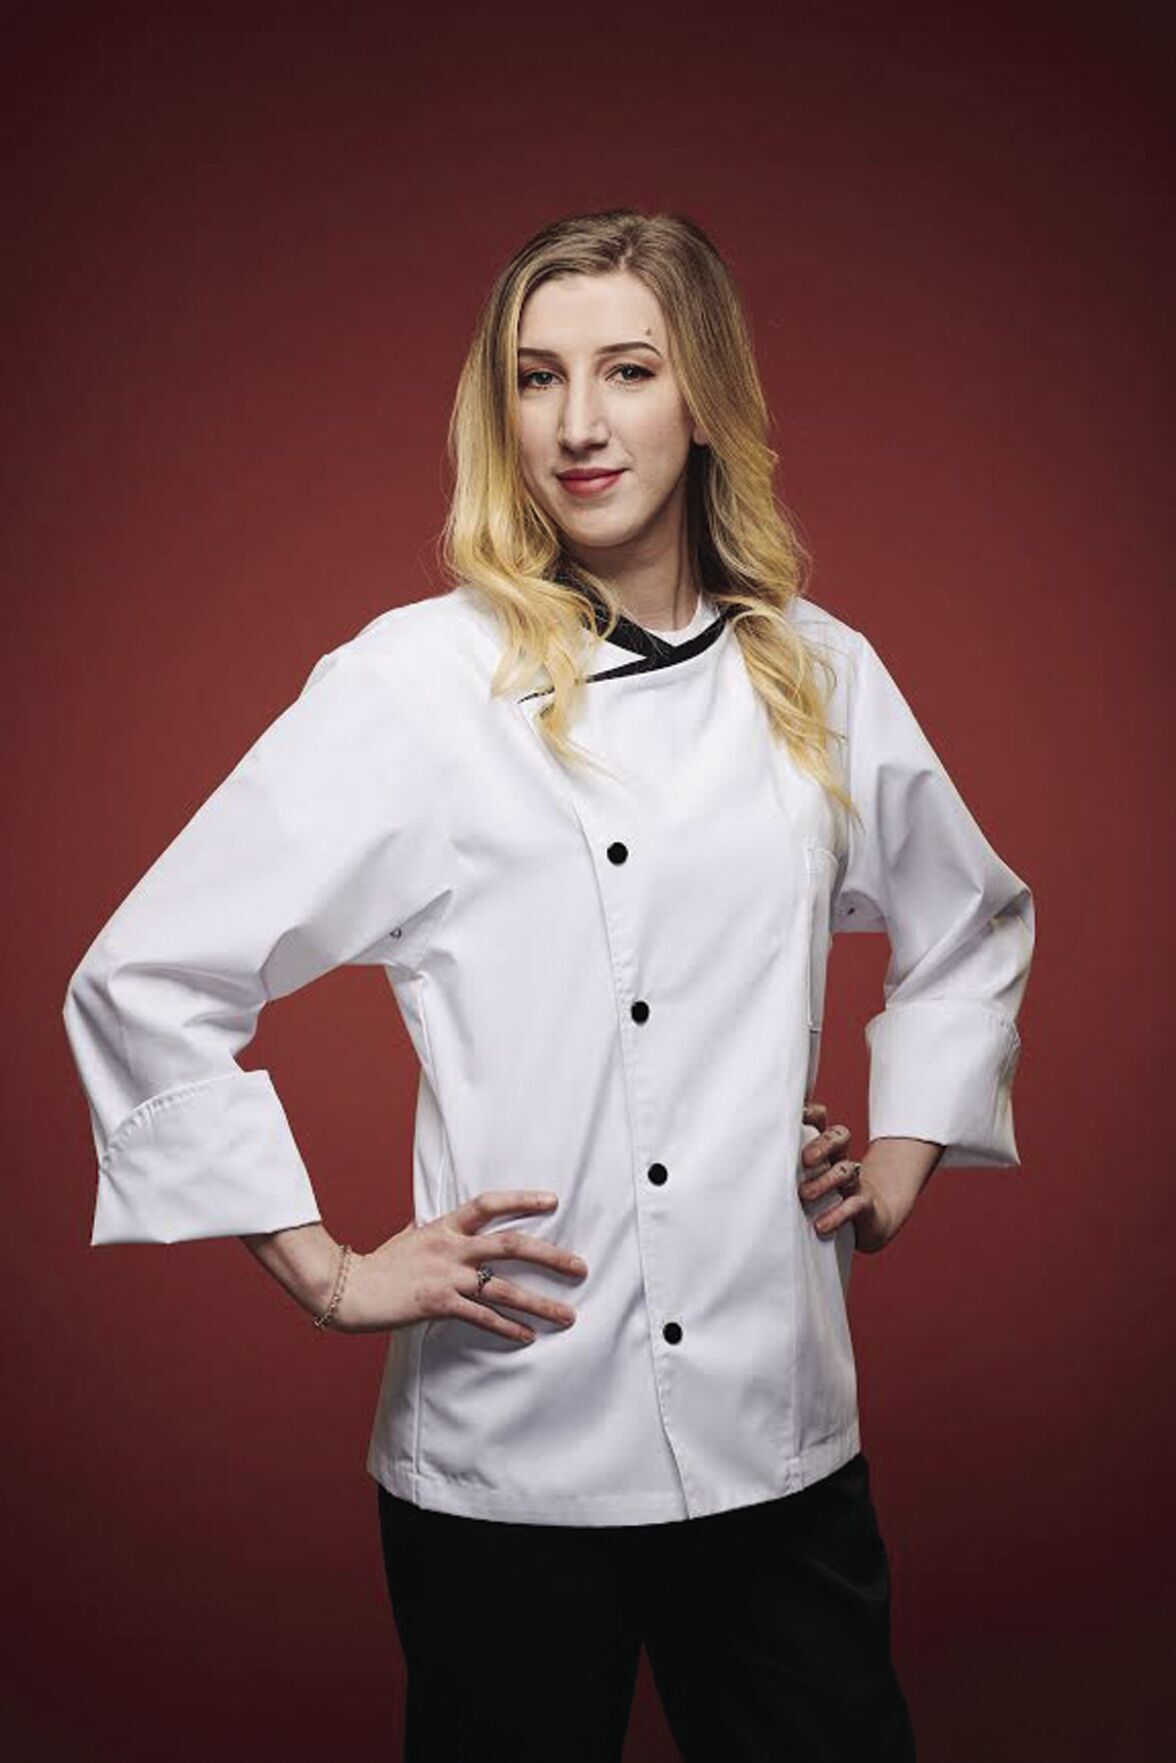 Wolfeboro Cook Feels The Heat On Fox S Hell S Kitchen Local News Laconiadailysun Com